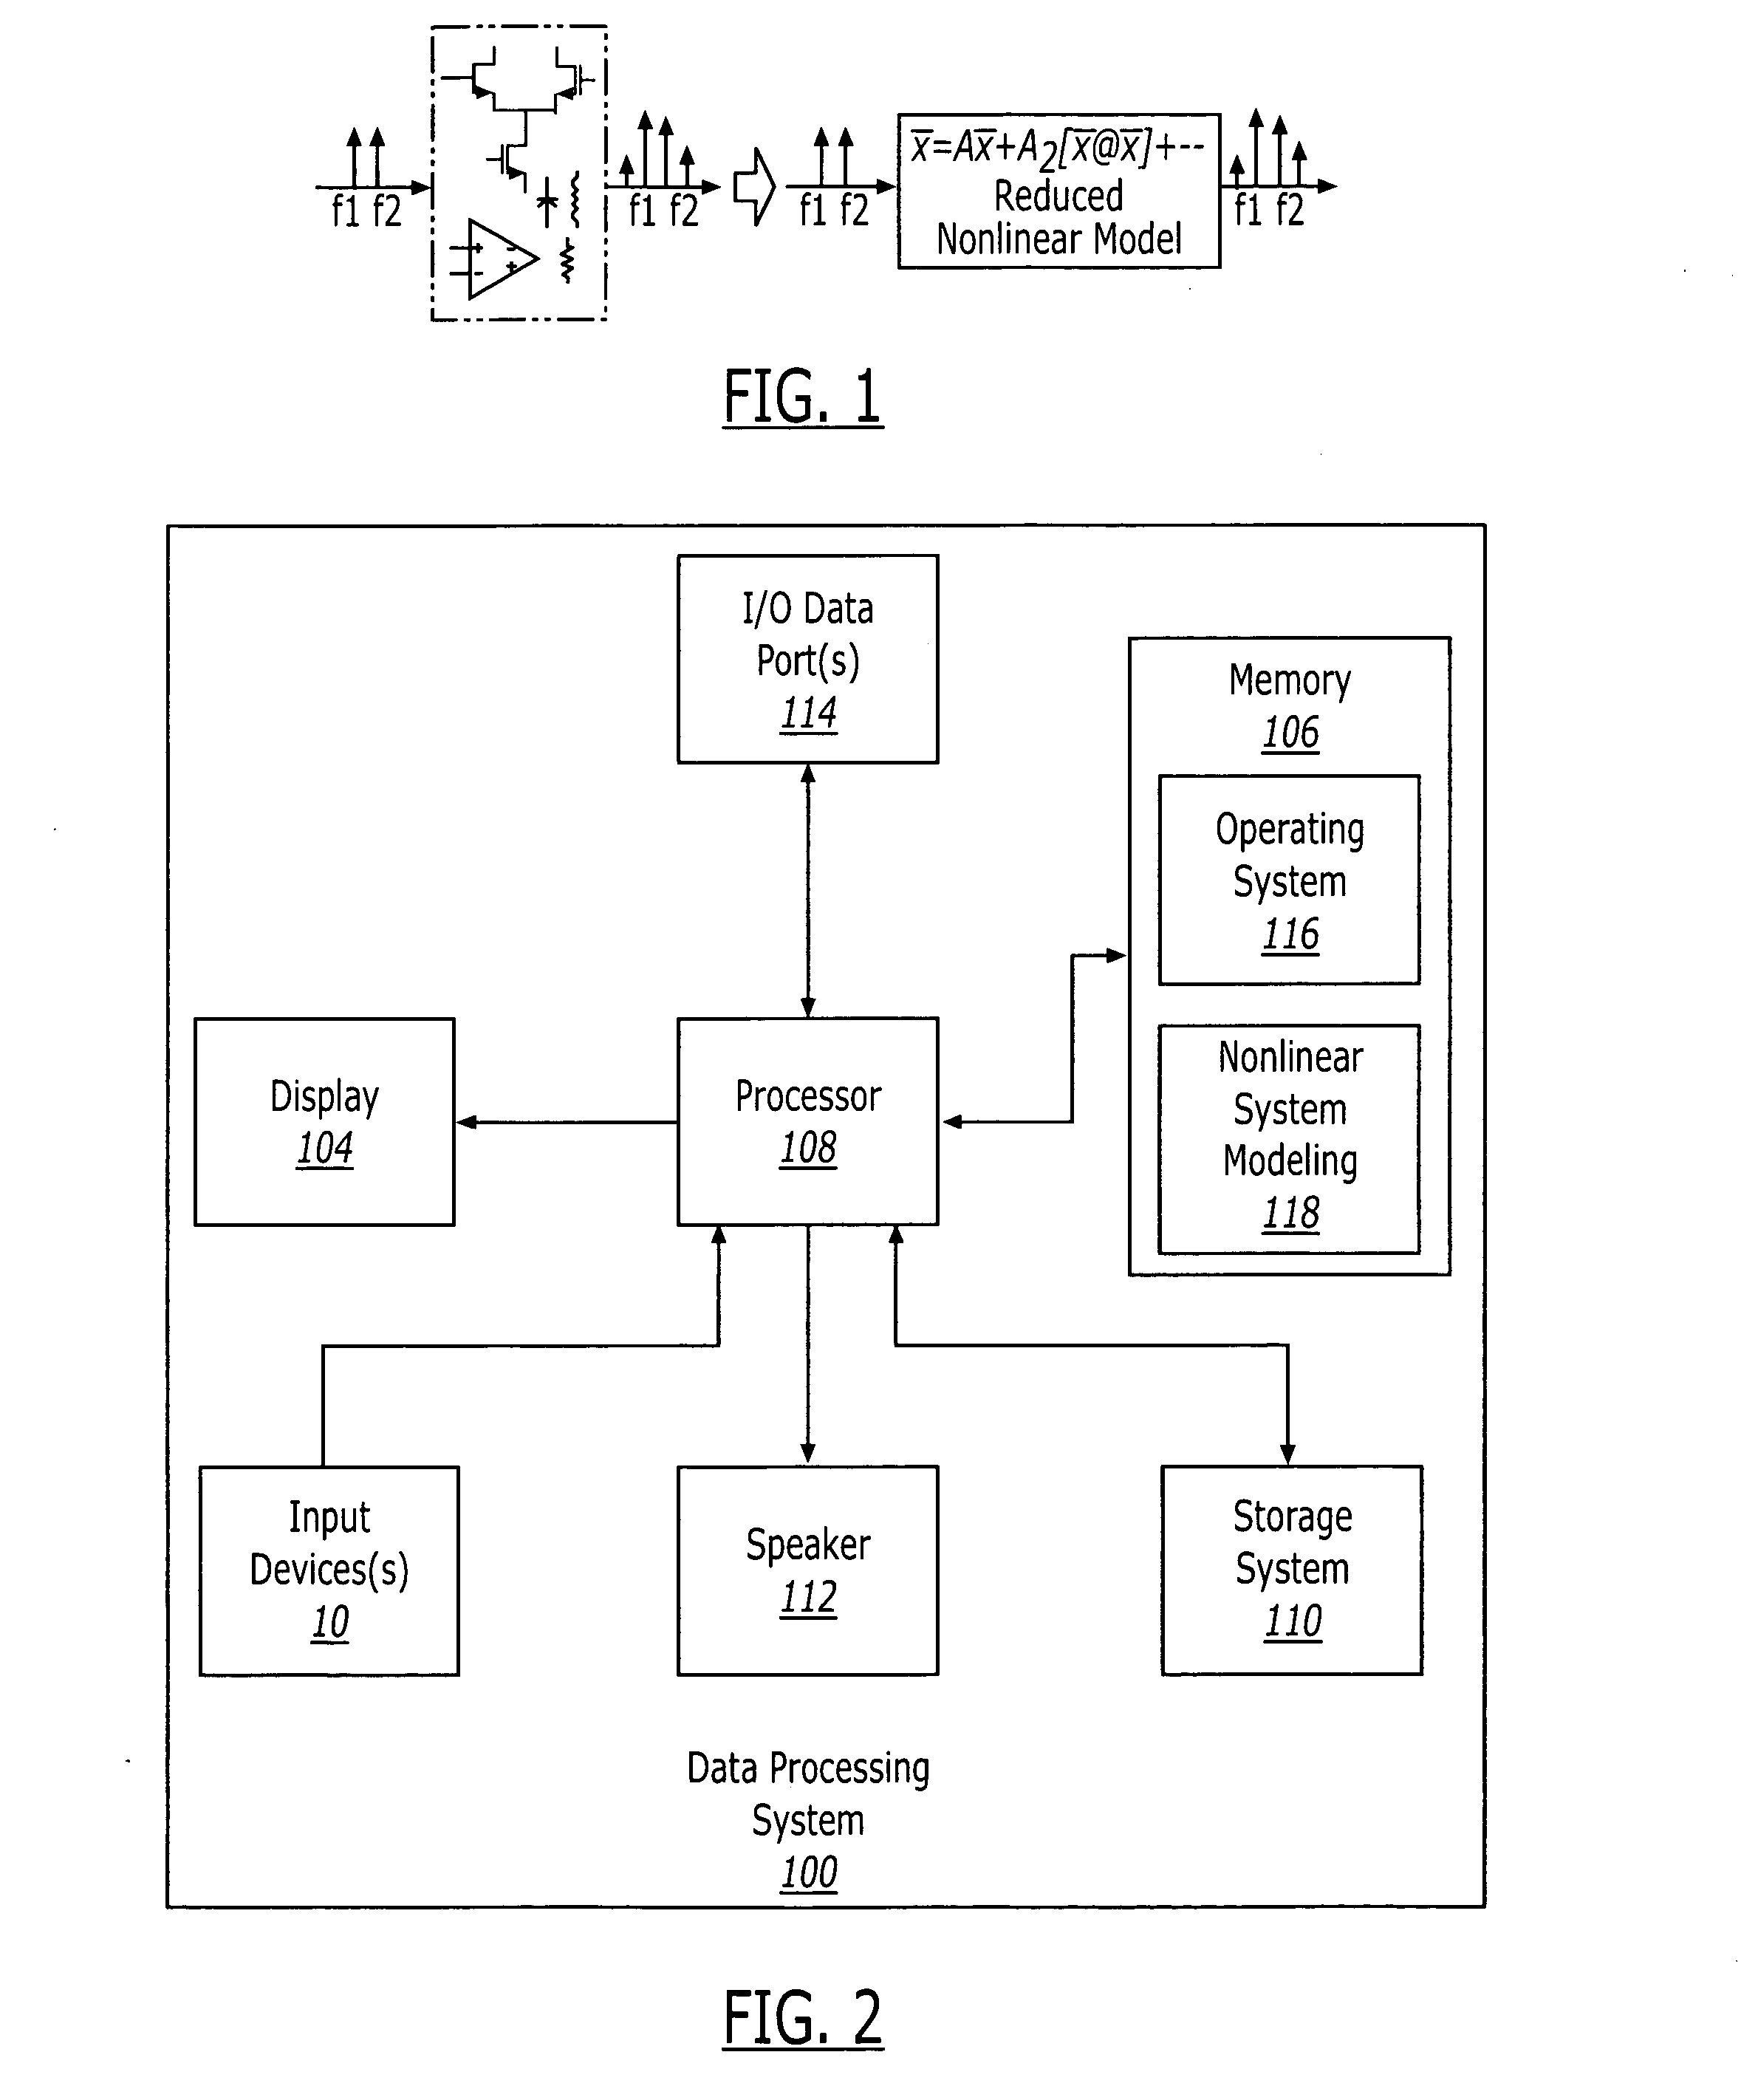 Methods, systems, and computer program products for modeling nonlinear systems